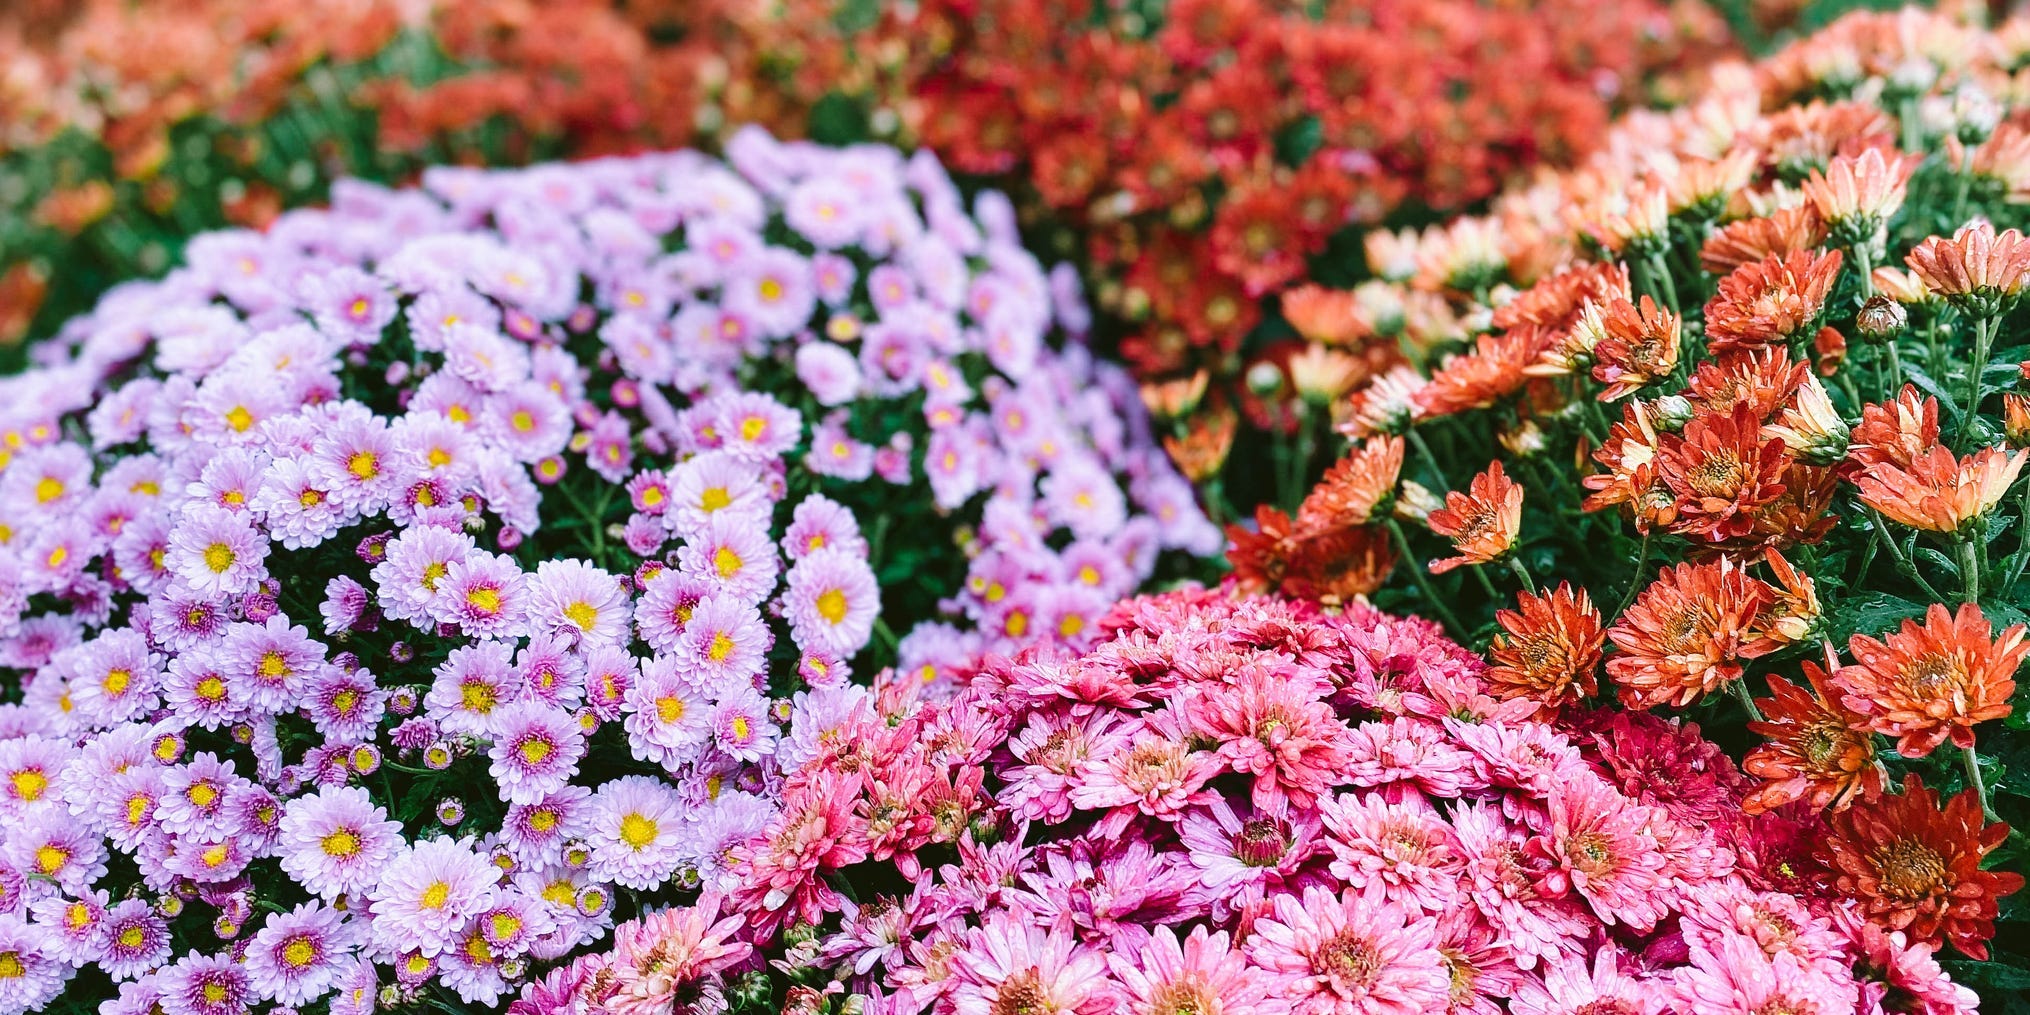 Bunches of different colored chrysanthemums.